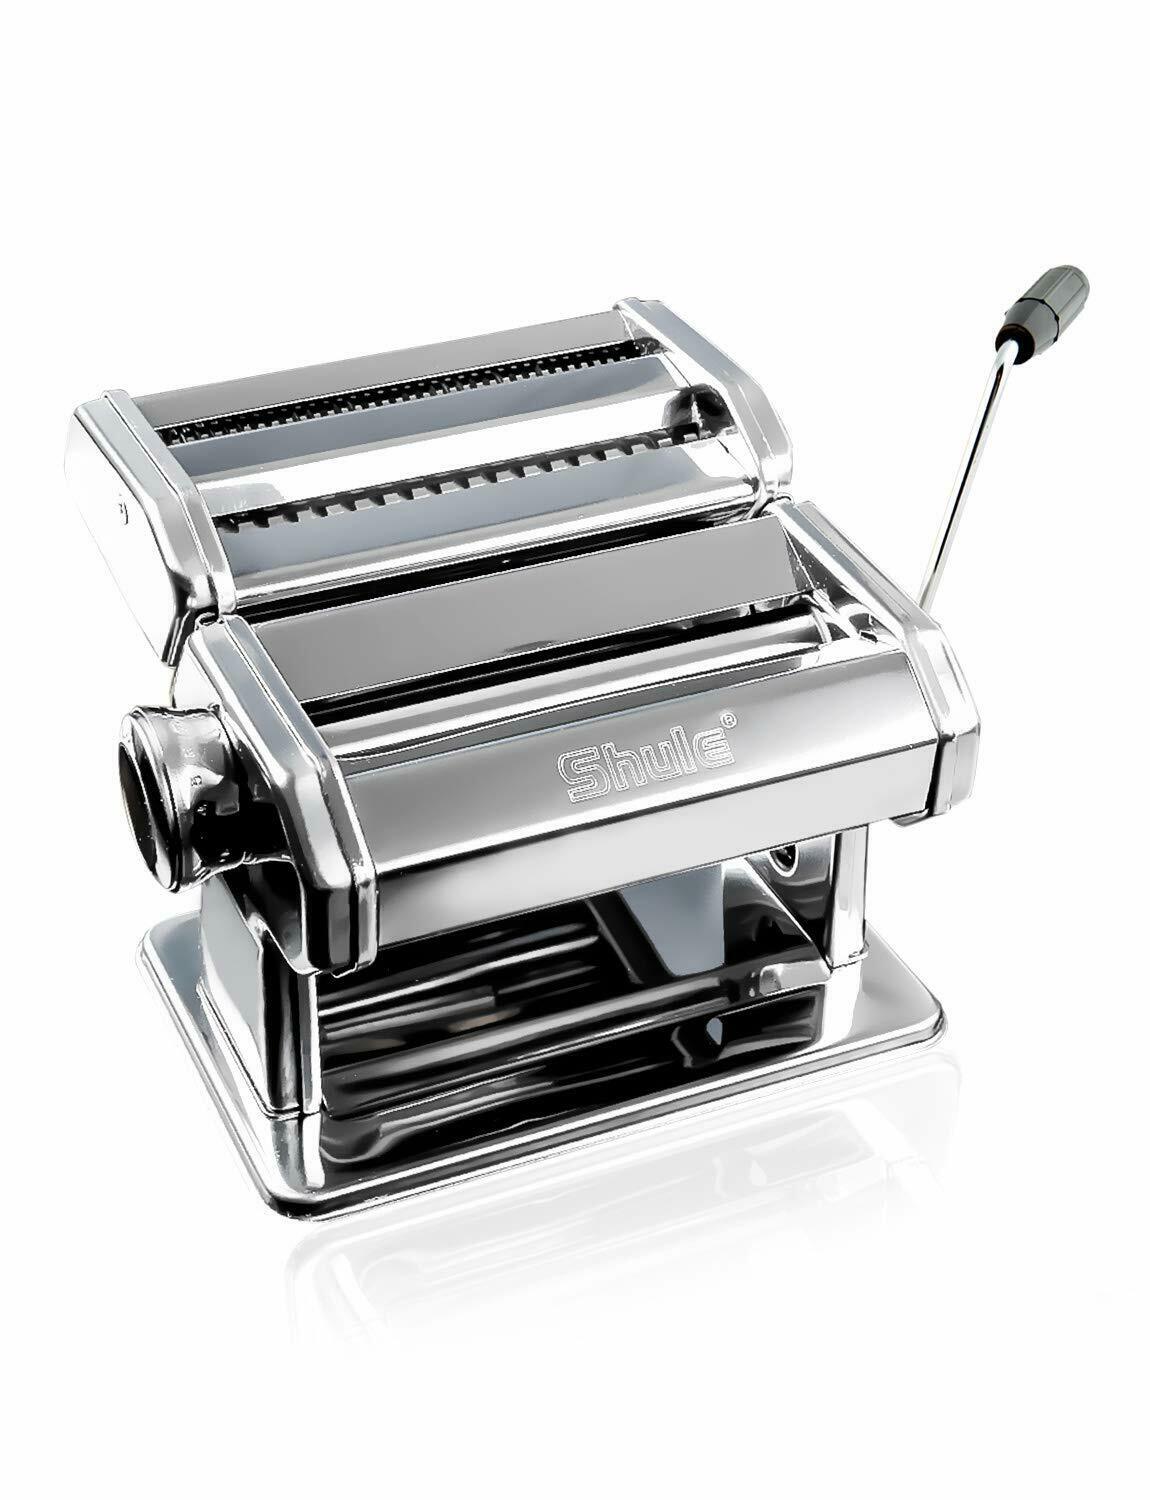 Shule Pasta Maker – Stainless Steel Pasta Machine Includes Pasta Roller